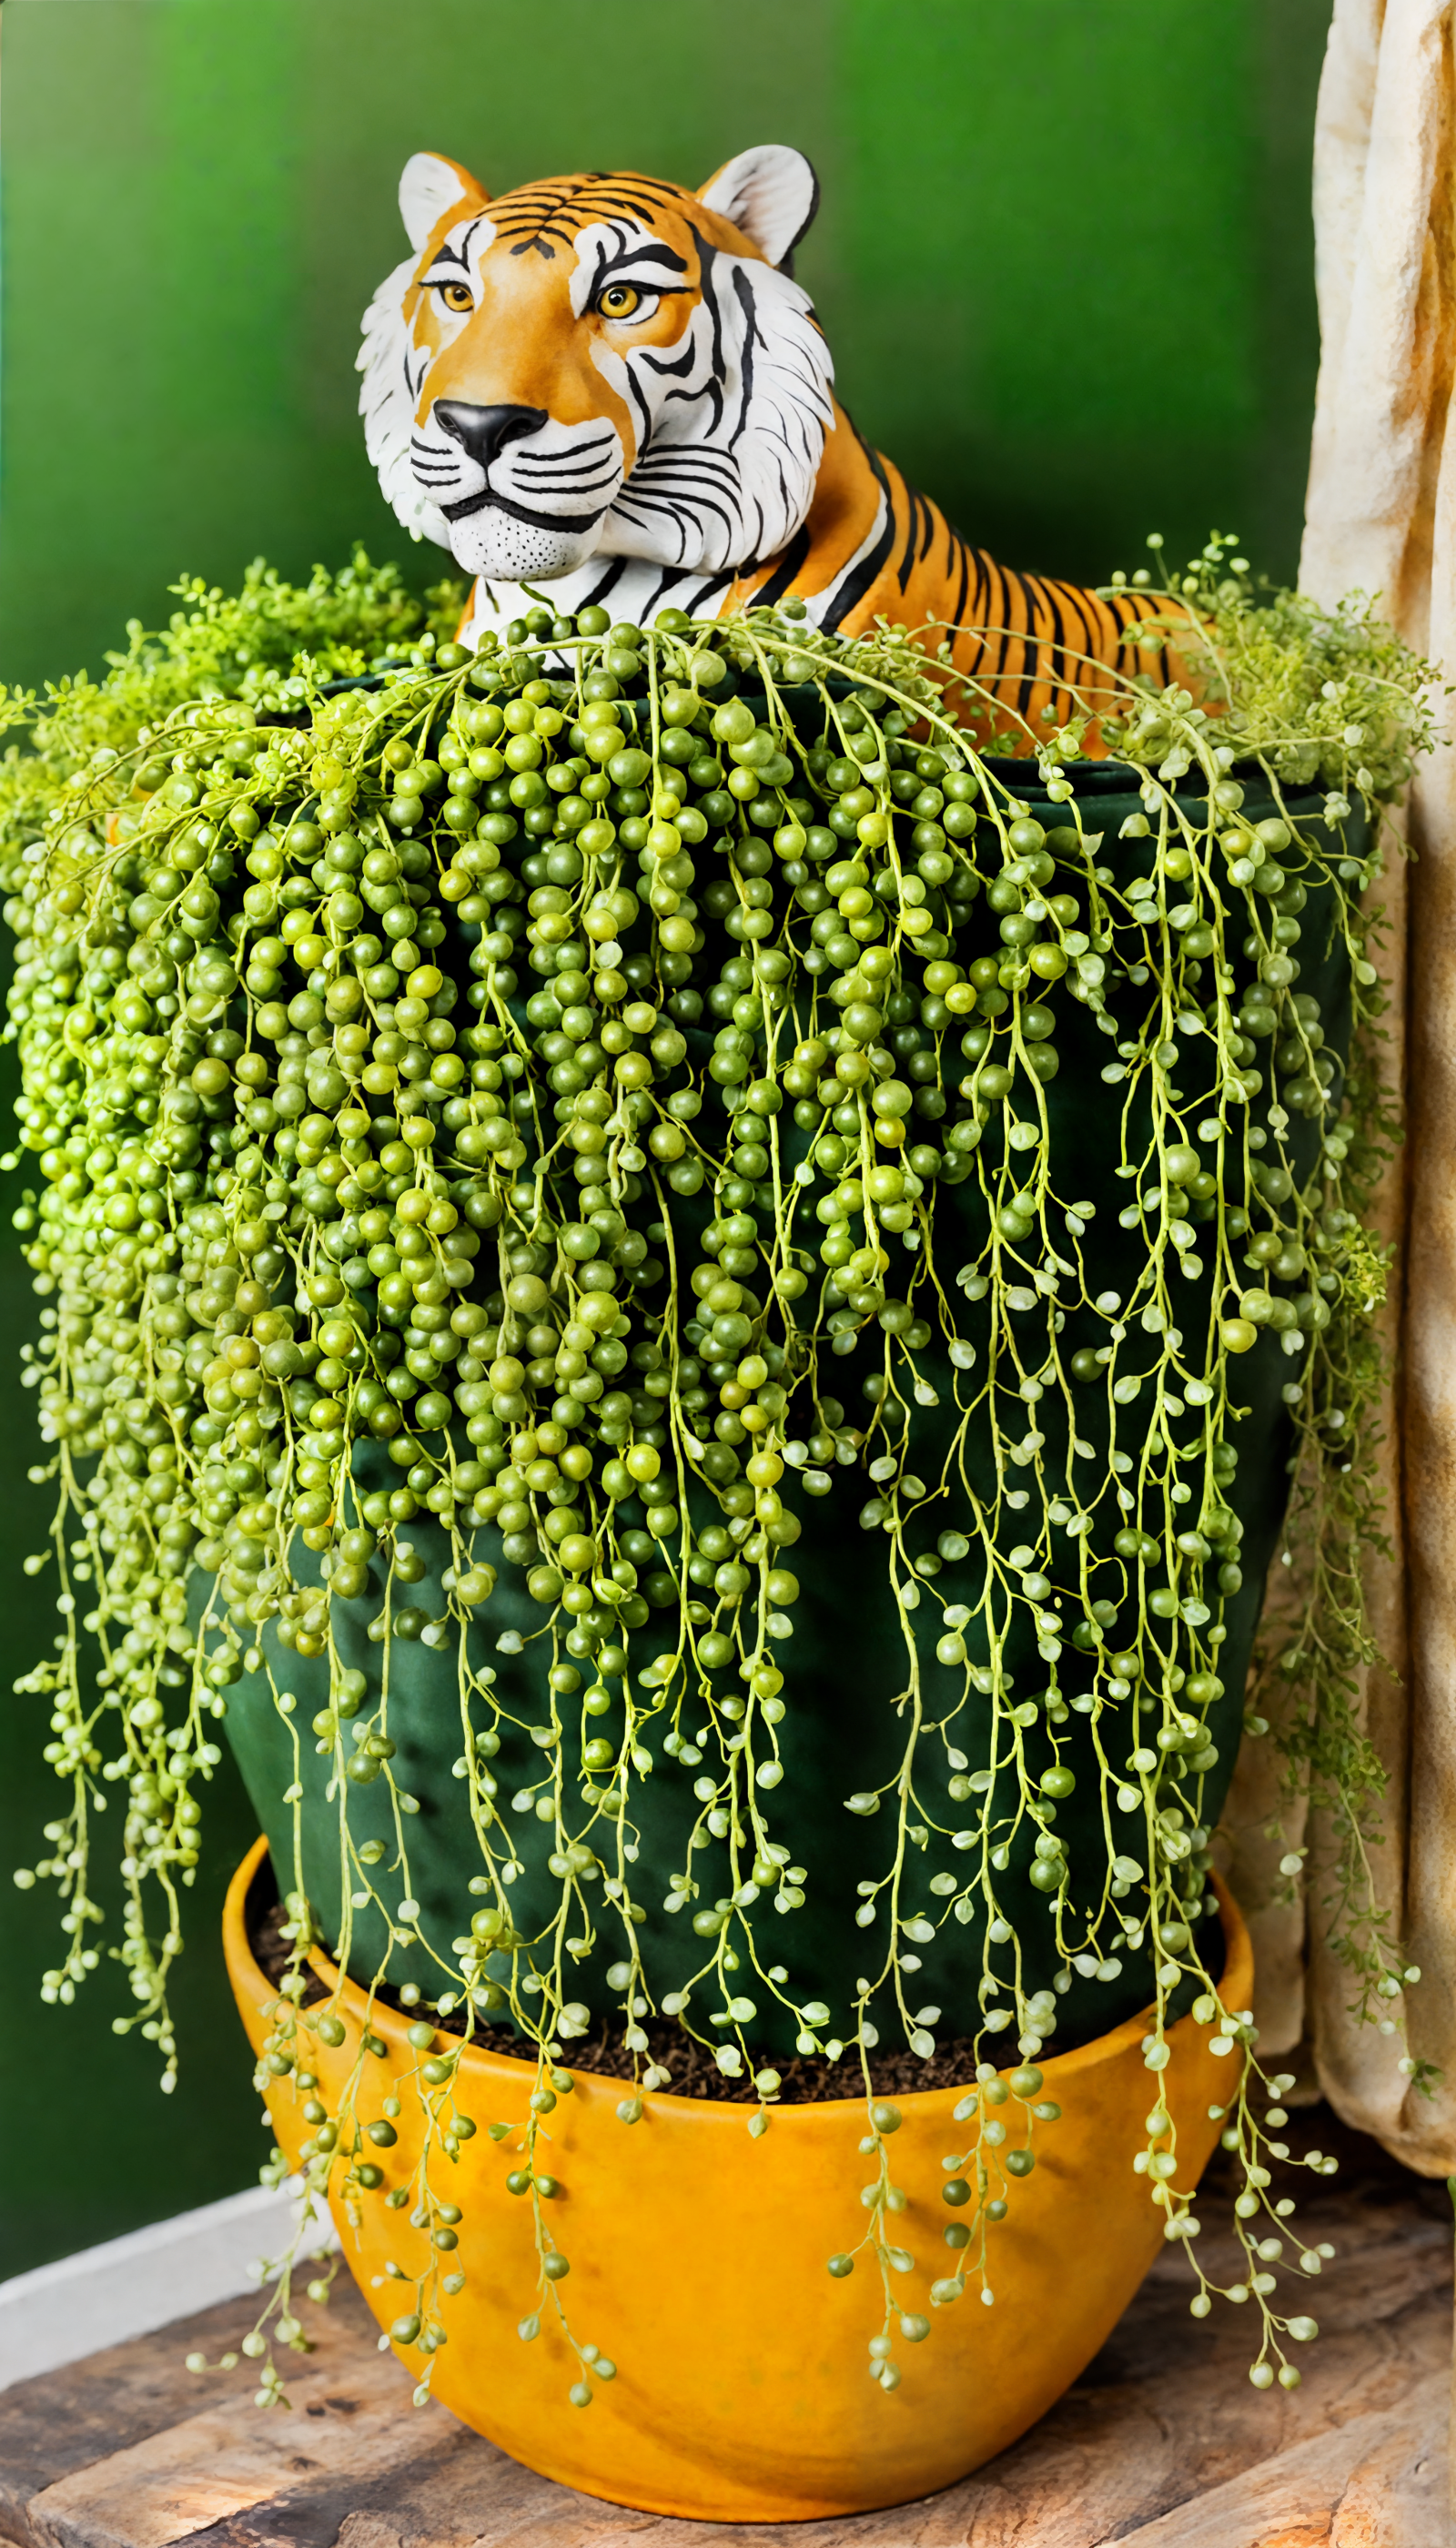 Curio rowleyanus (String of Pearls) in a rustic planter on a wooden table, with clear, neutral lighting.